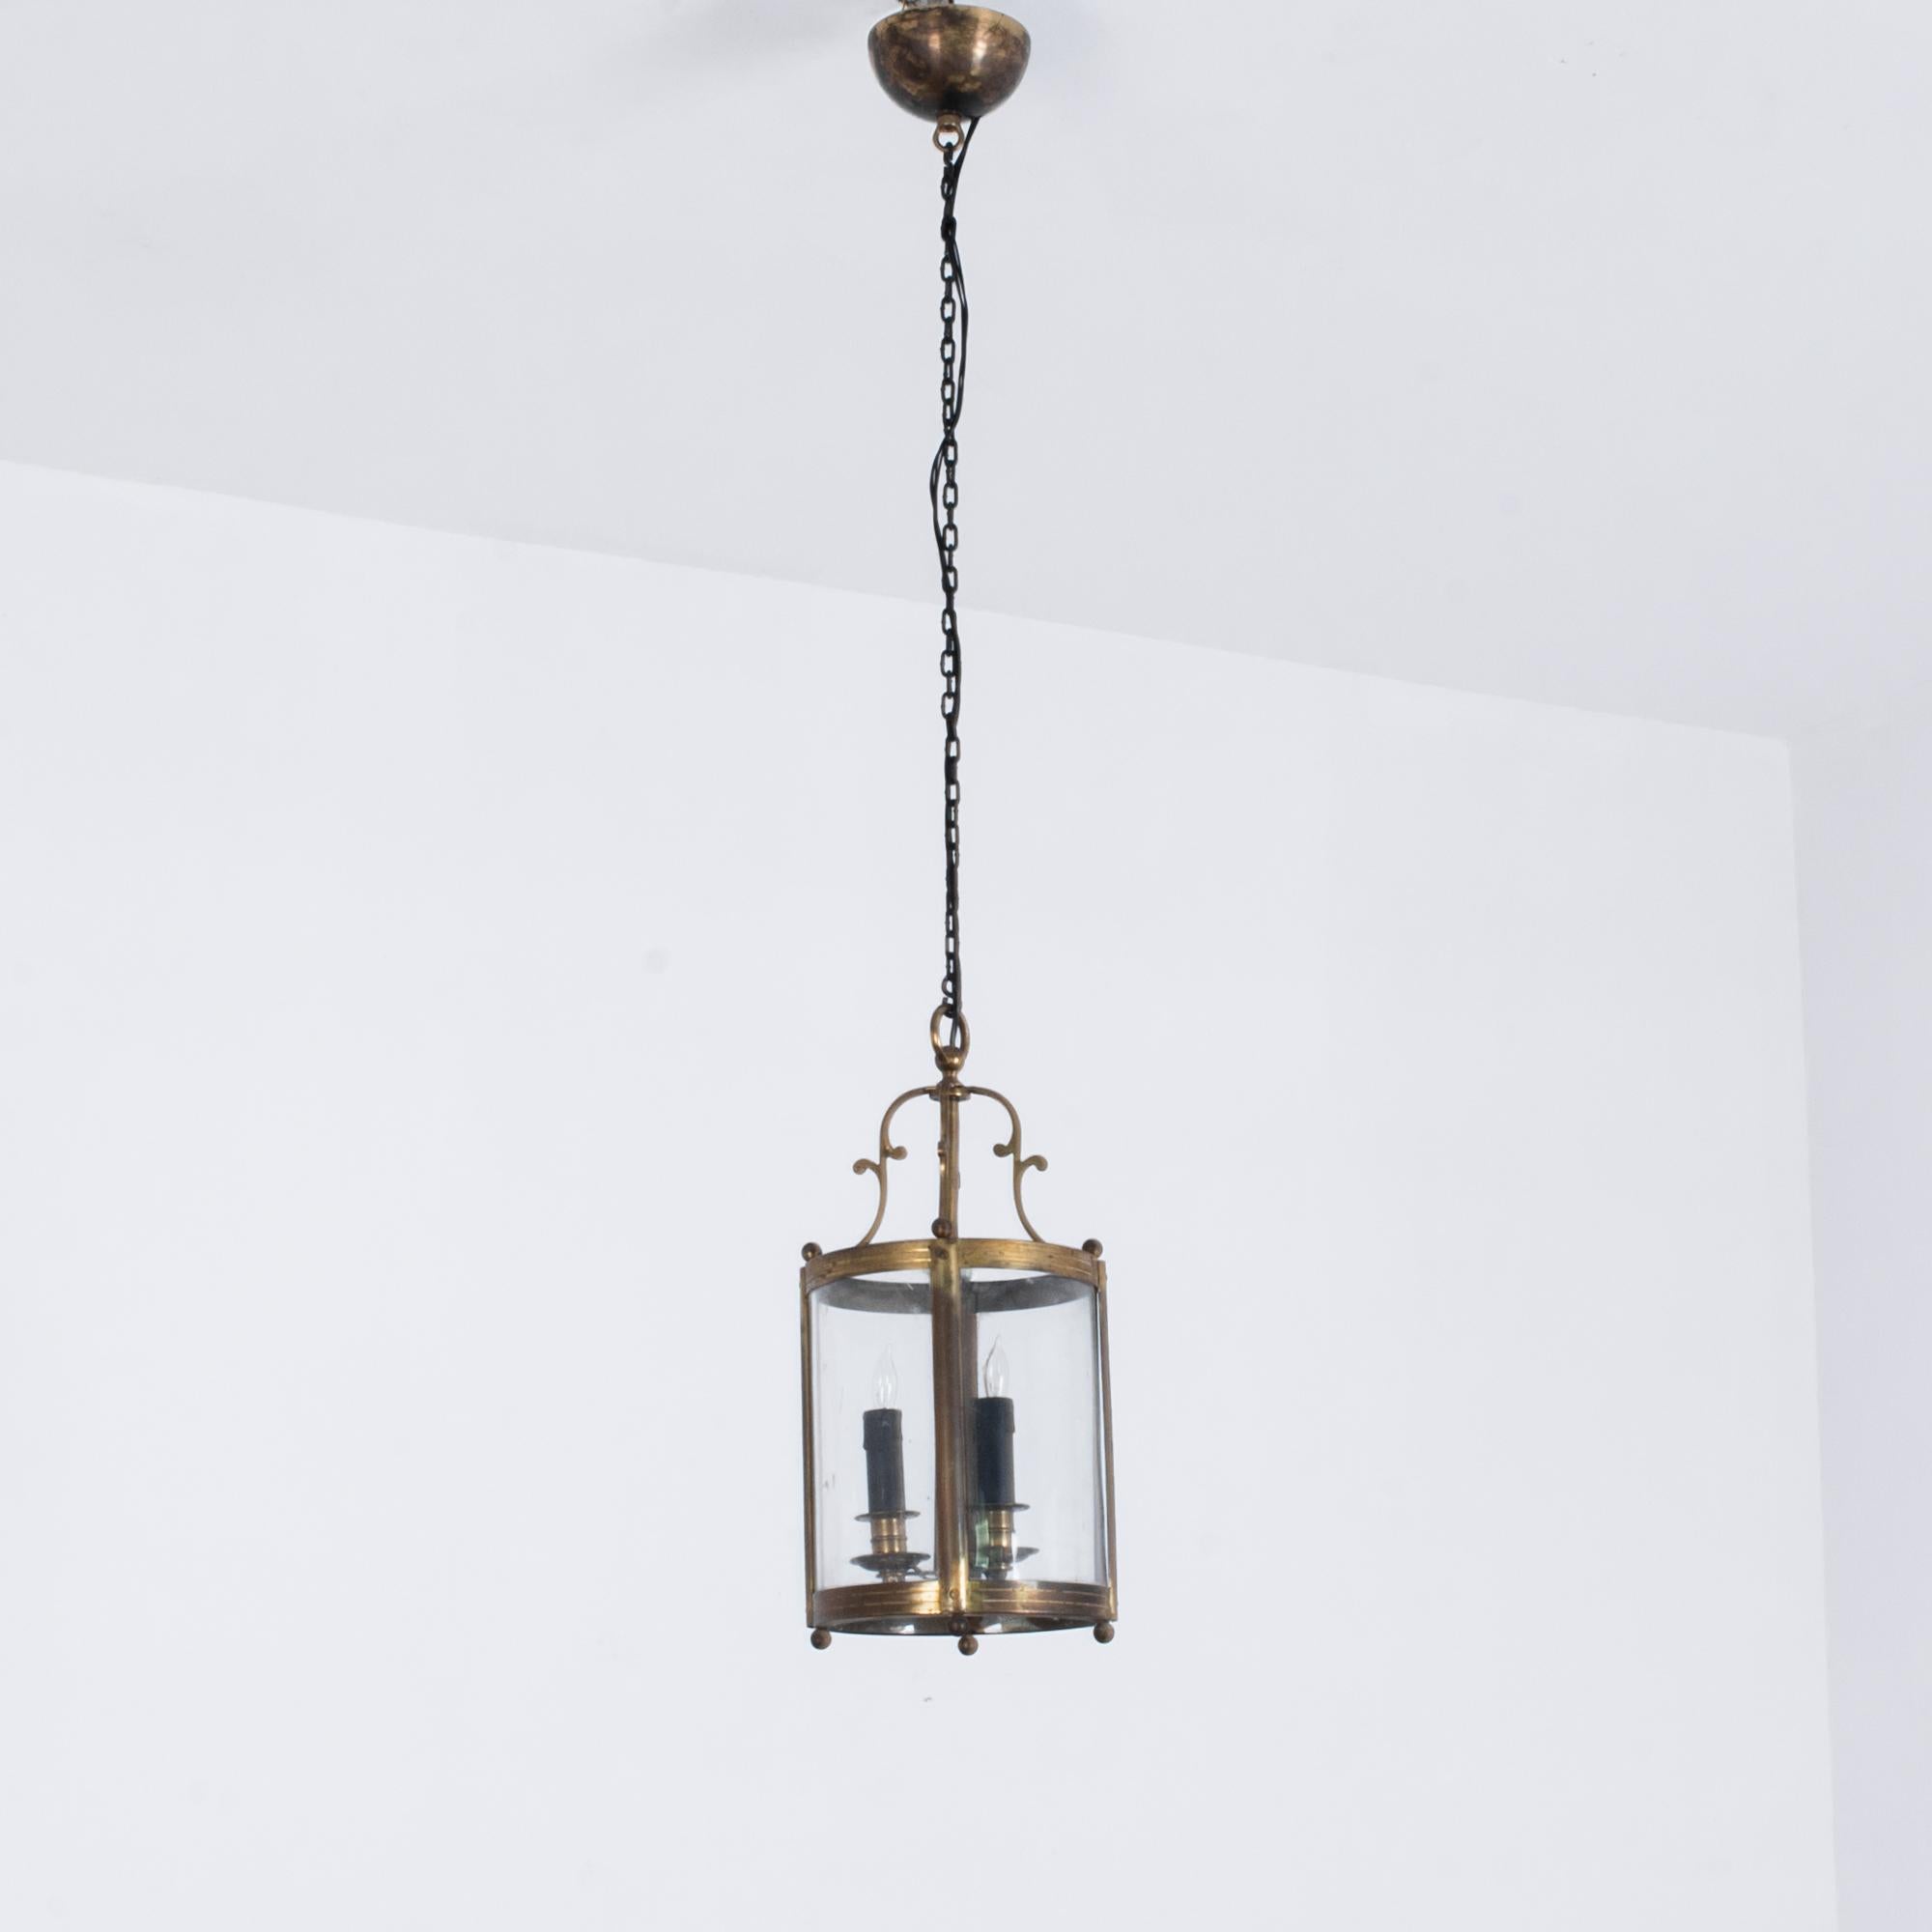 This brass lantern was made in France, circa 1920. It features a circular frame and two candle light bulbs, suspended from a ceiling rose. With the bell-shaped decorative elements above the lantern and small decorative spheres, the lamp will